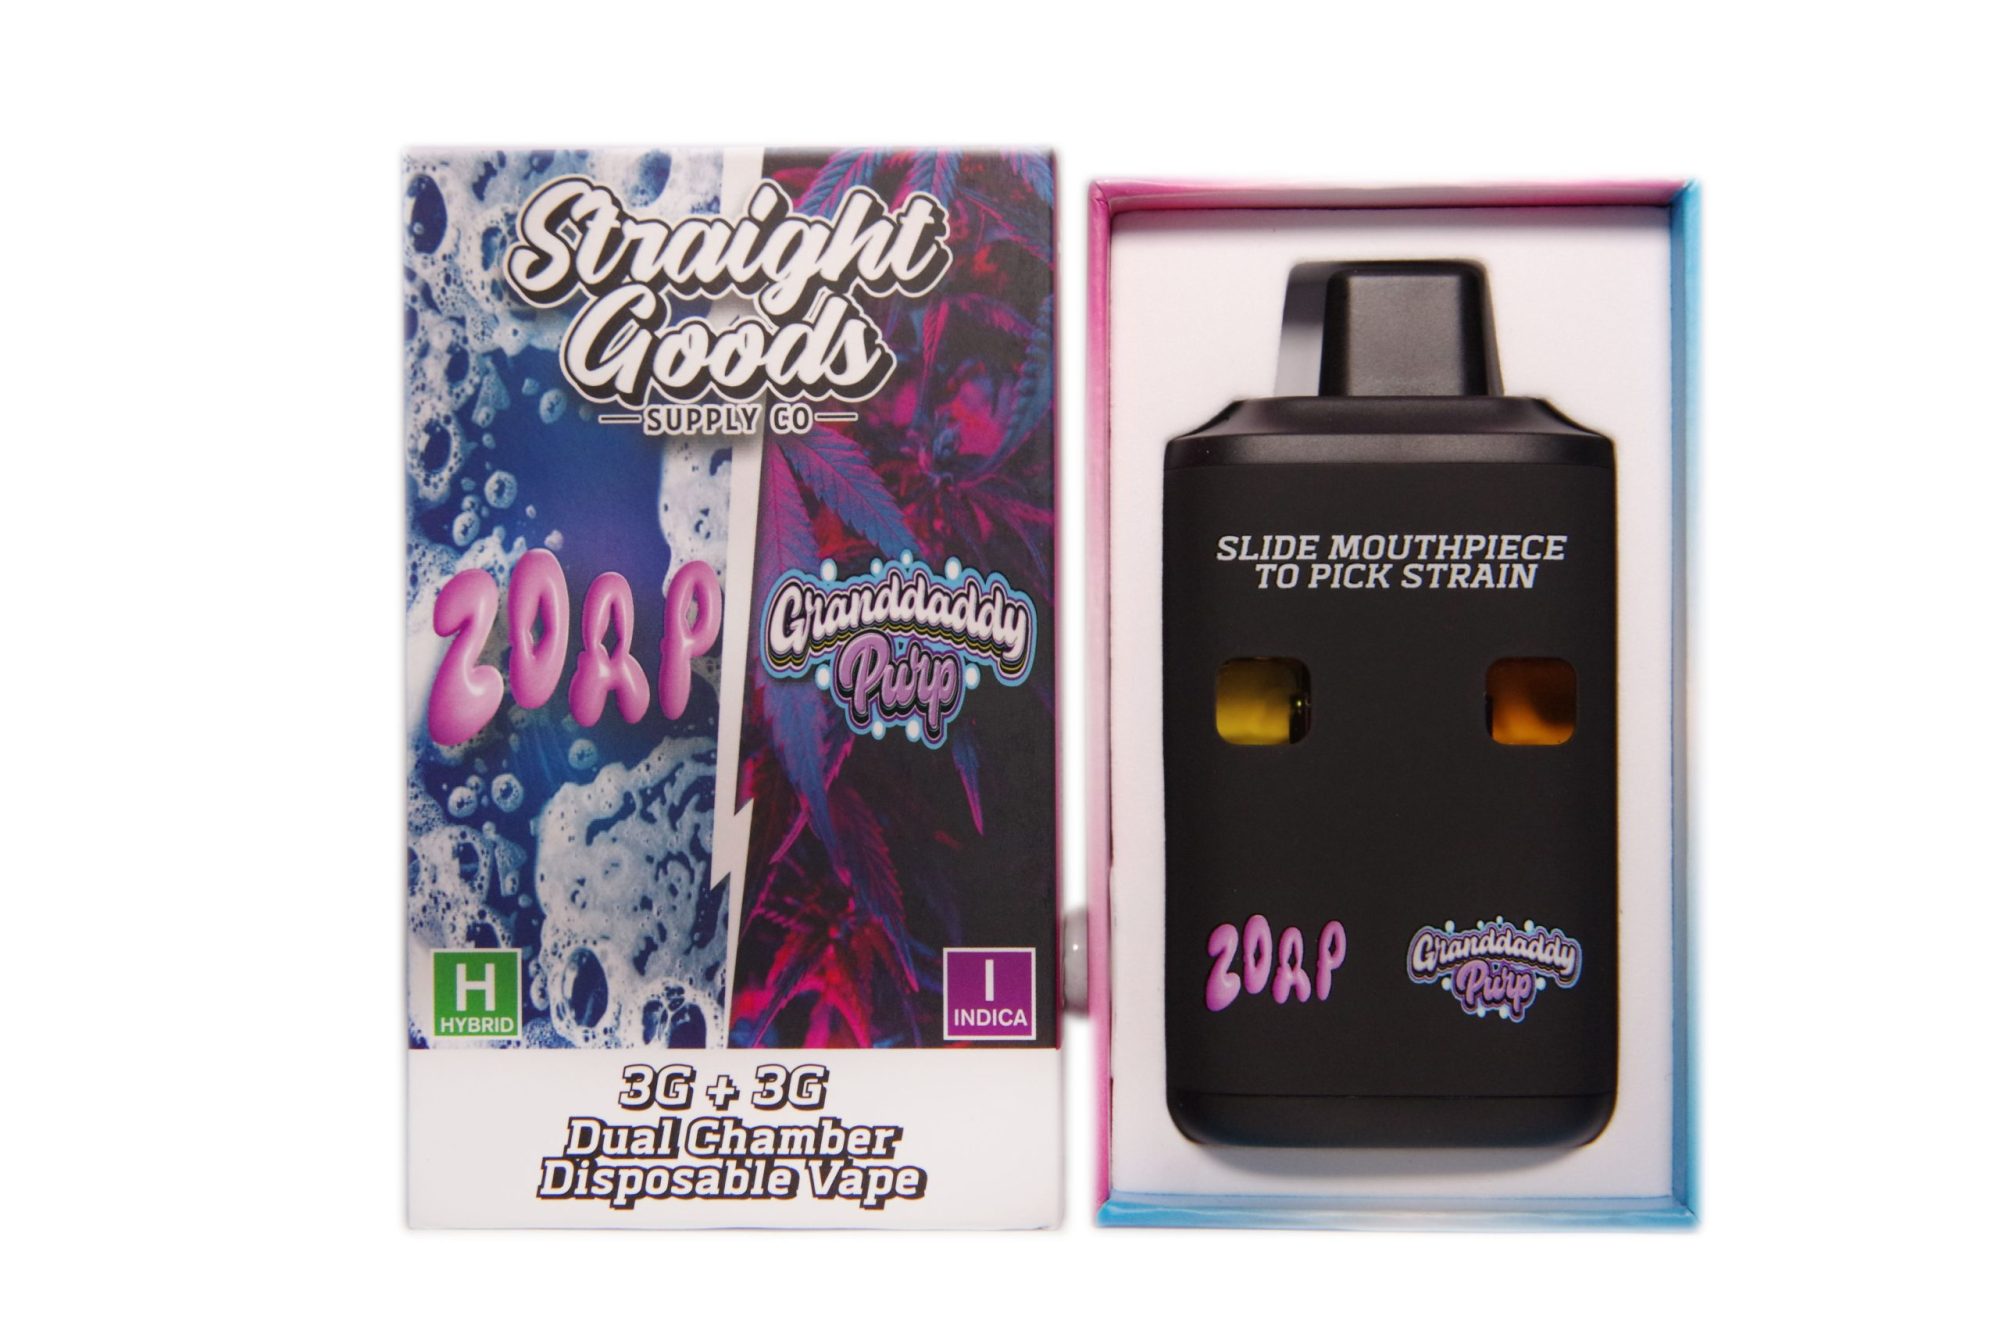 Buy Straight Goods - Dual Chamber Vape - Zoap + Granddaddy Purp (3 Grams + 3 Grams) at Wccannabis Online Shop